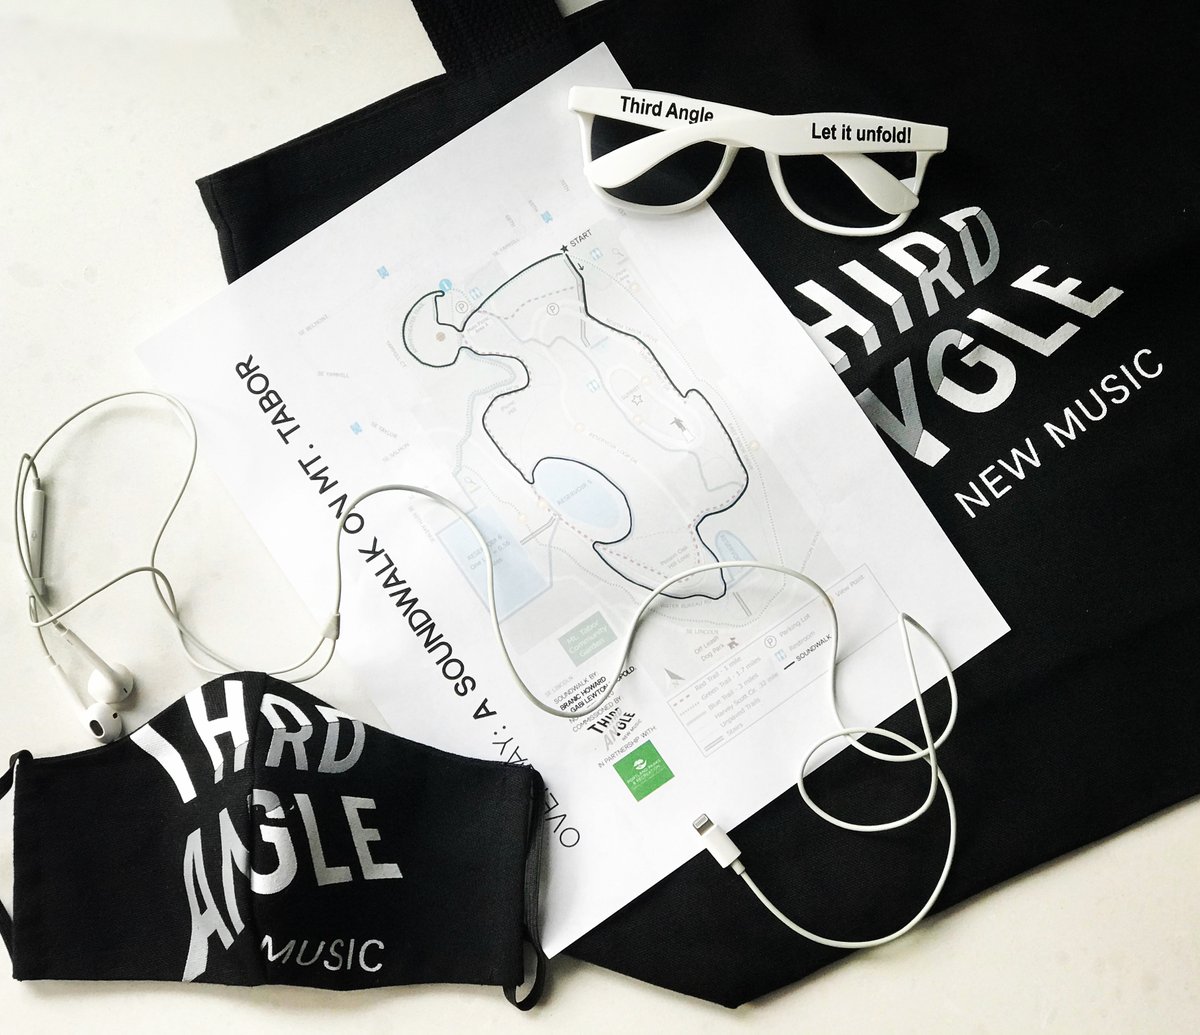 Headphones✔️ Mask✔️ Map✔️ Sense of adventure✔️ Make sure you're all geared up for your #soundwalk through Mt. Tabor Park! Download FREE at thirdangle.org/soundwalks #soundwalks #outdoors #parks #outside #team3a #thirdangle #thirdanglenewmusic #newmusic #anythingbutordinary